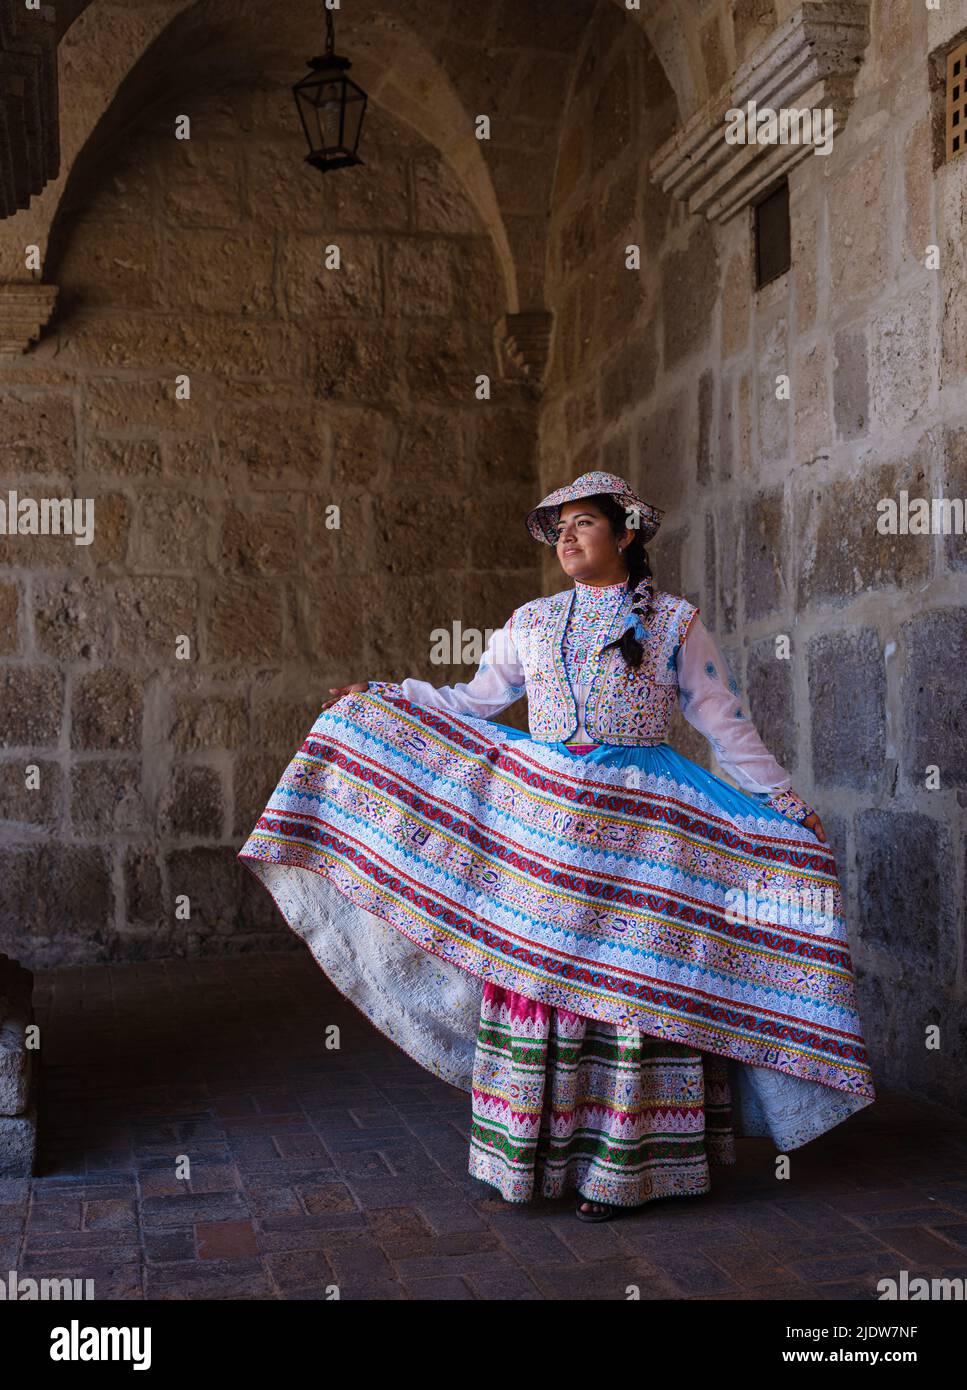 AREQUIPA, PERU - CIRCA SEPTEMBER 2019: Young Peruvian woman smiling and wearing a typical andean dress. Stock Photo